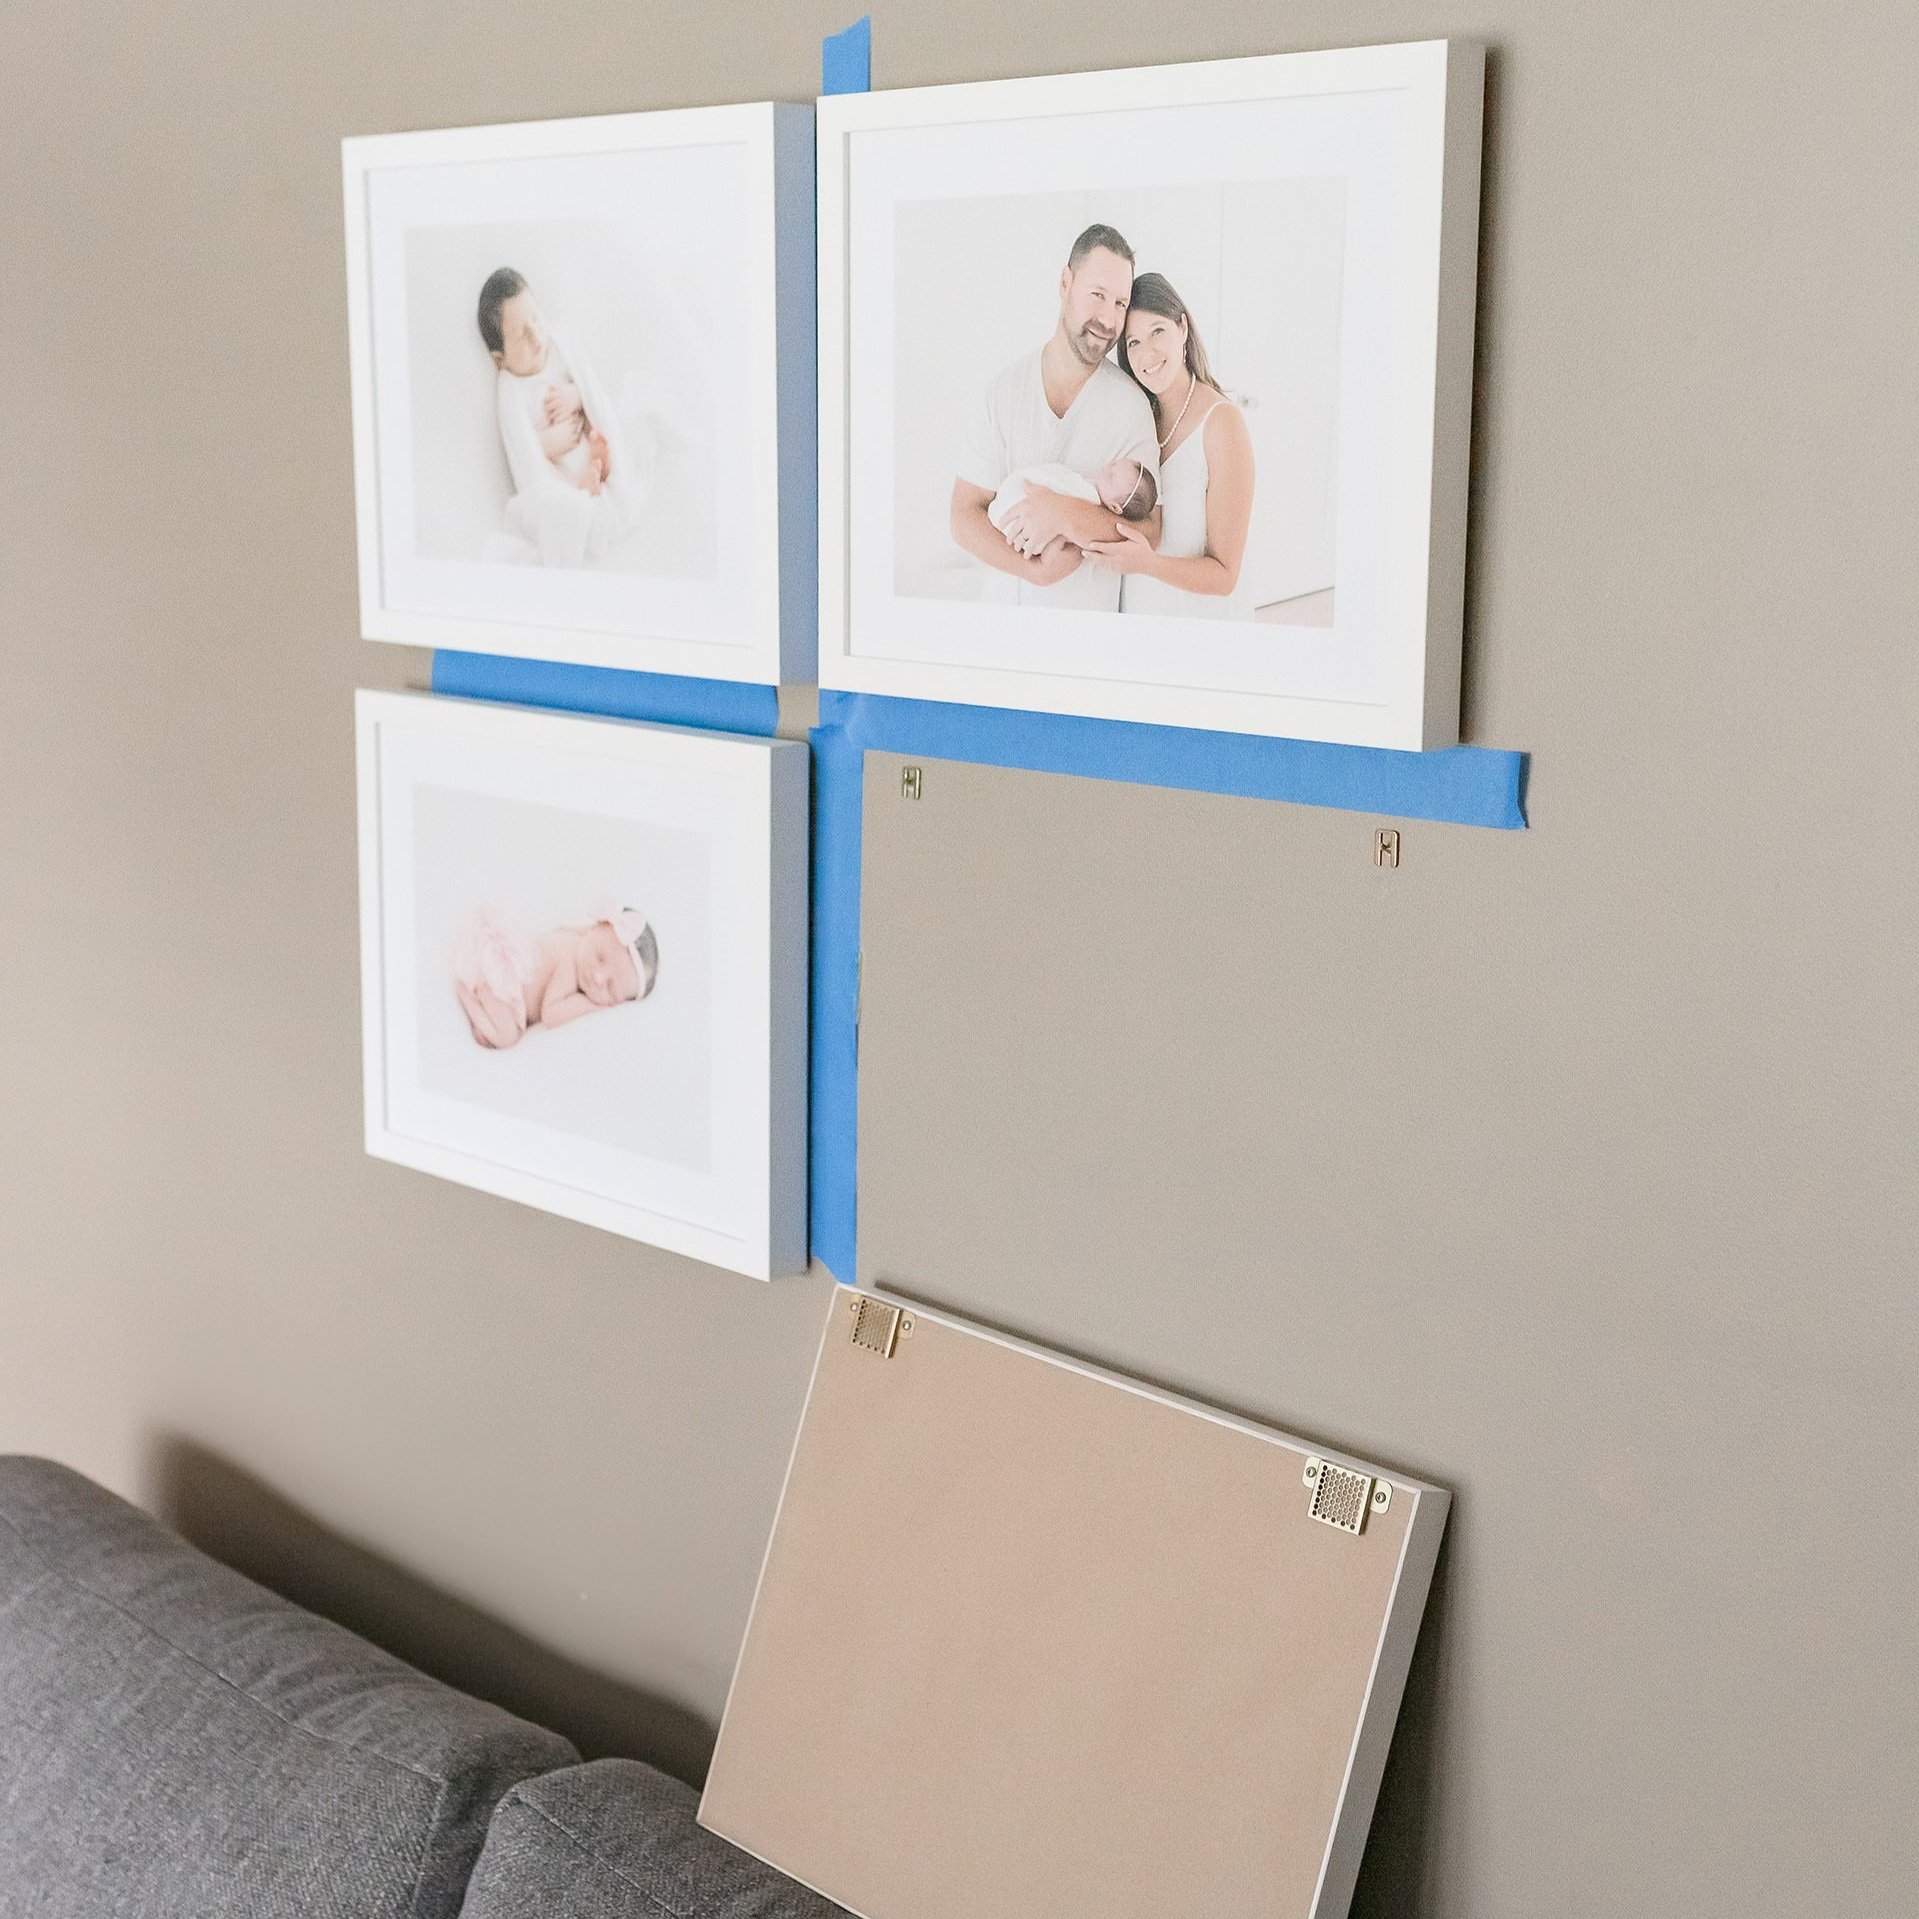 Installing-Newborn-and-Family-Photography-Grid-Wall-Gallery.jpg